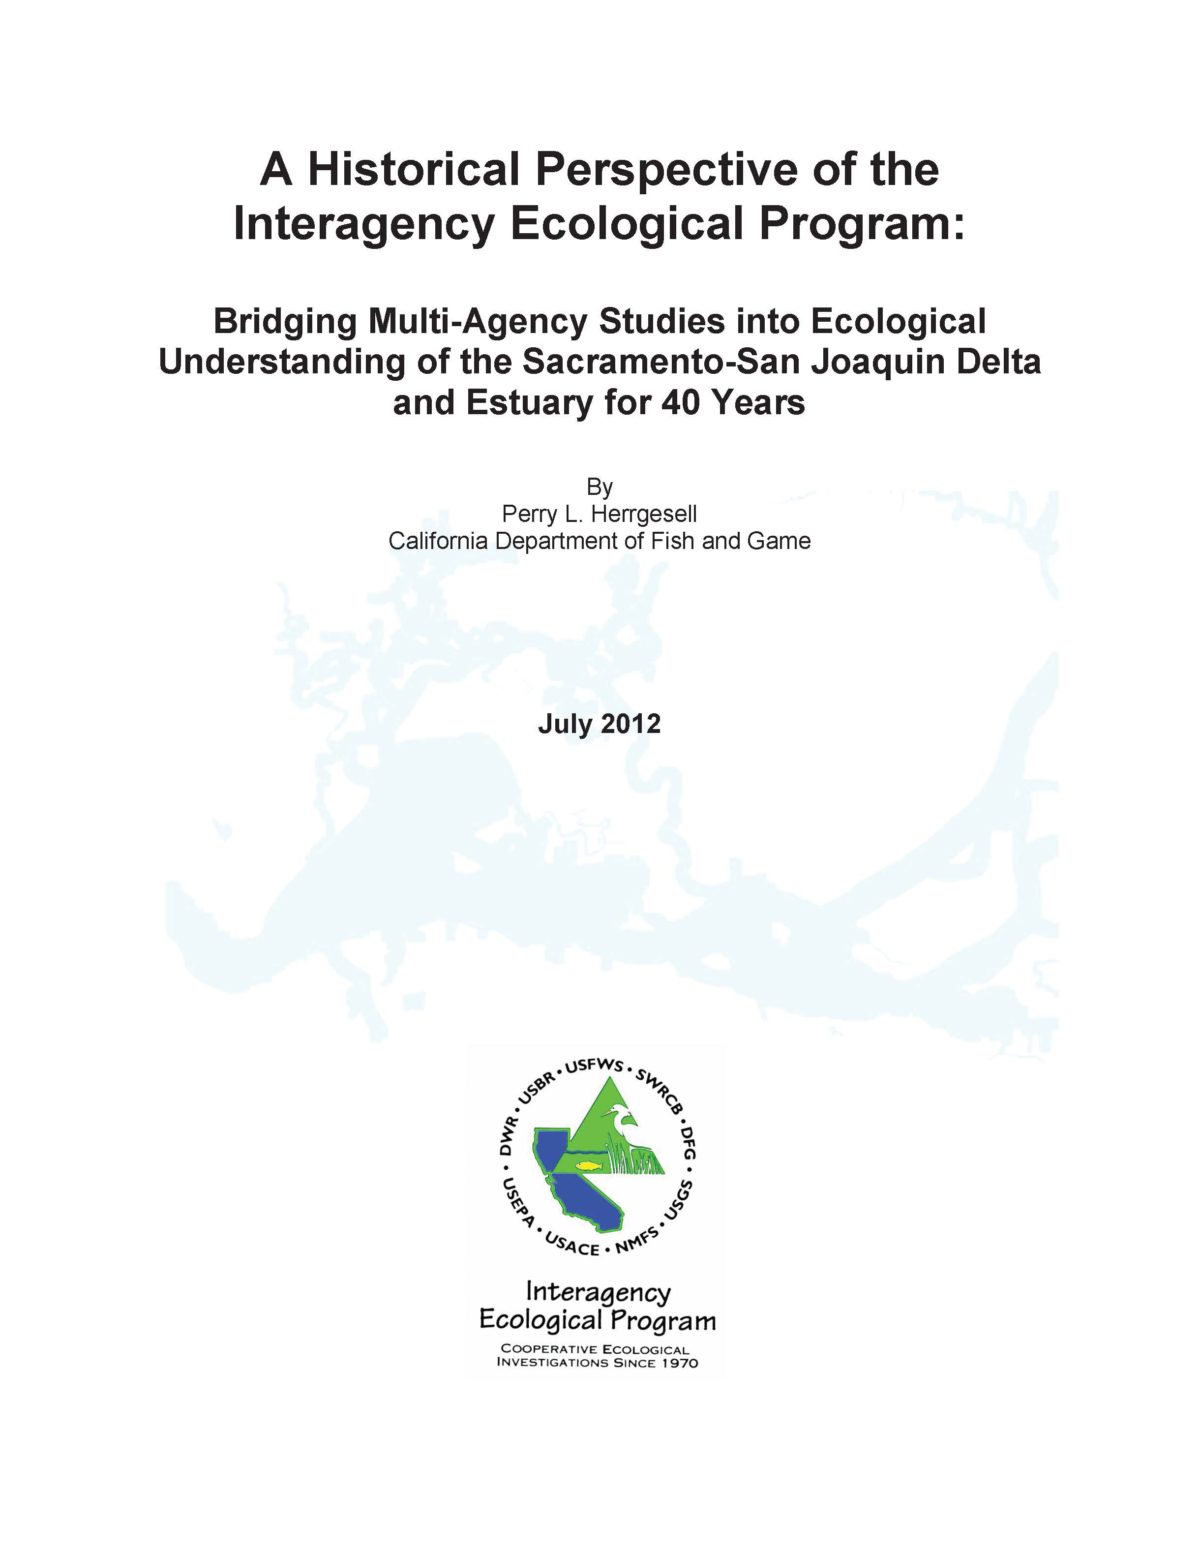 A Historical Perspective of the Interagency Ecological Program: Bridging Multi-Agency Studies into Ecological Understanding of the Sacramento-San Joaquin Delta and Estuary for 40 Years